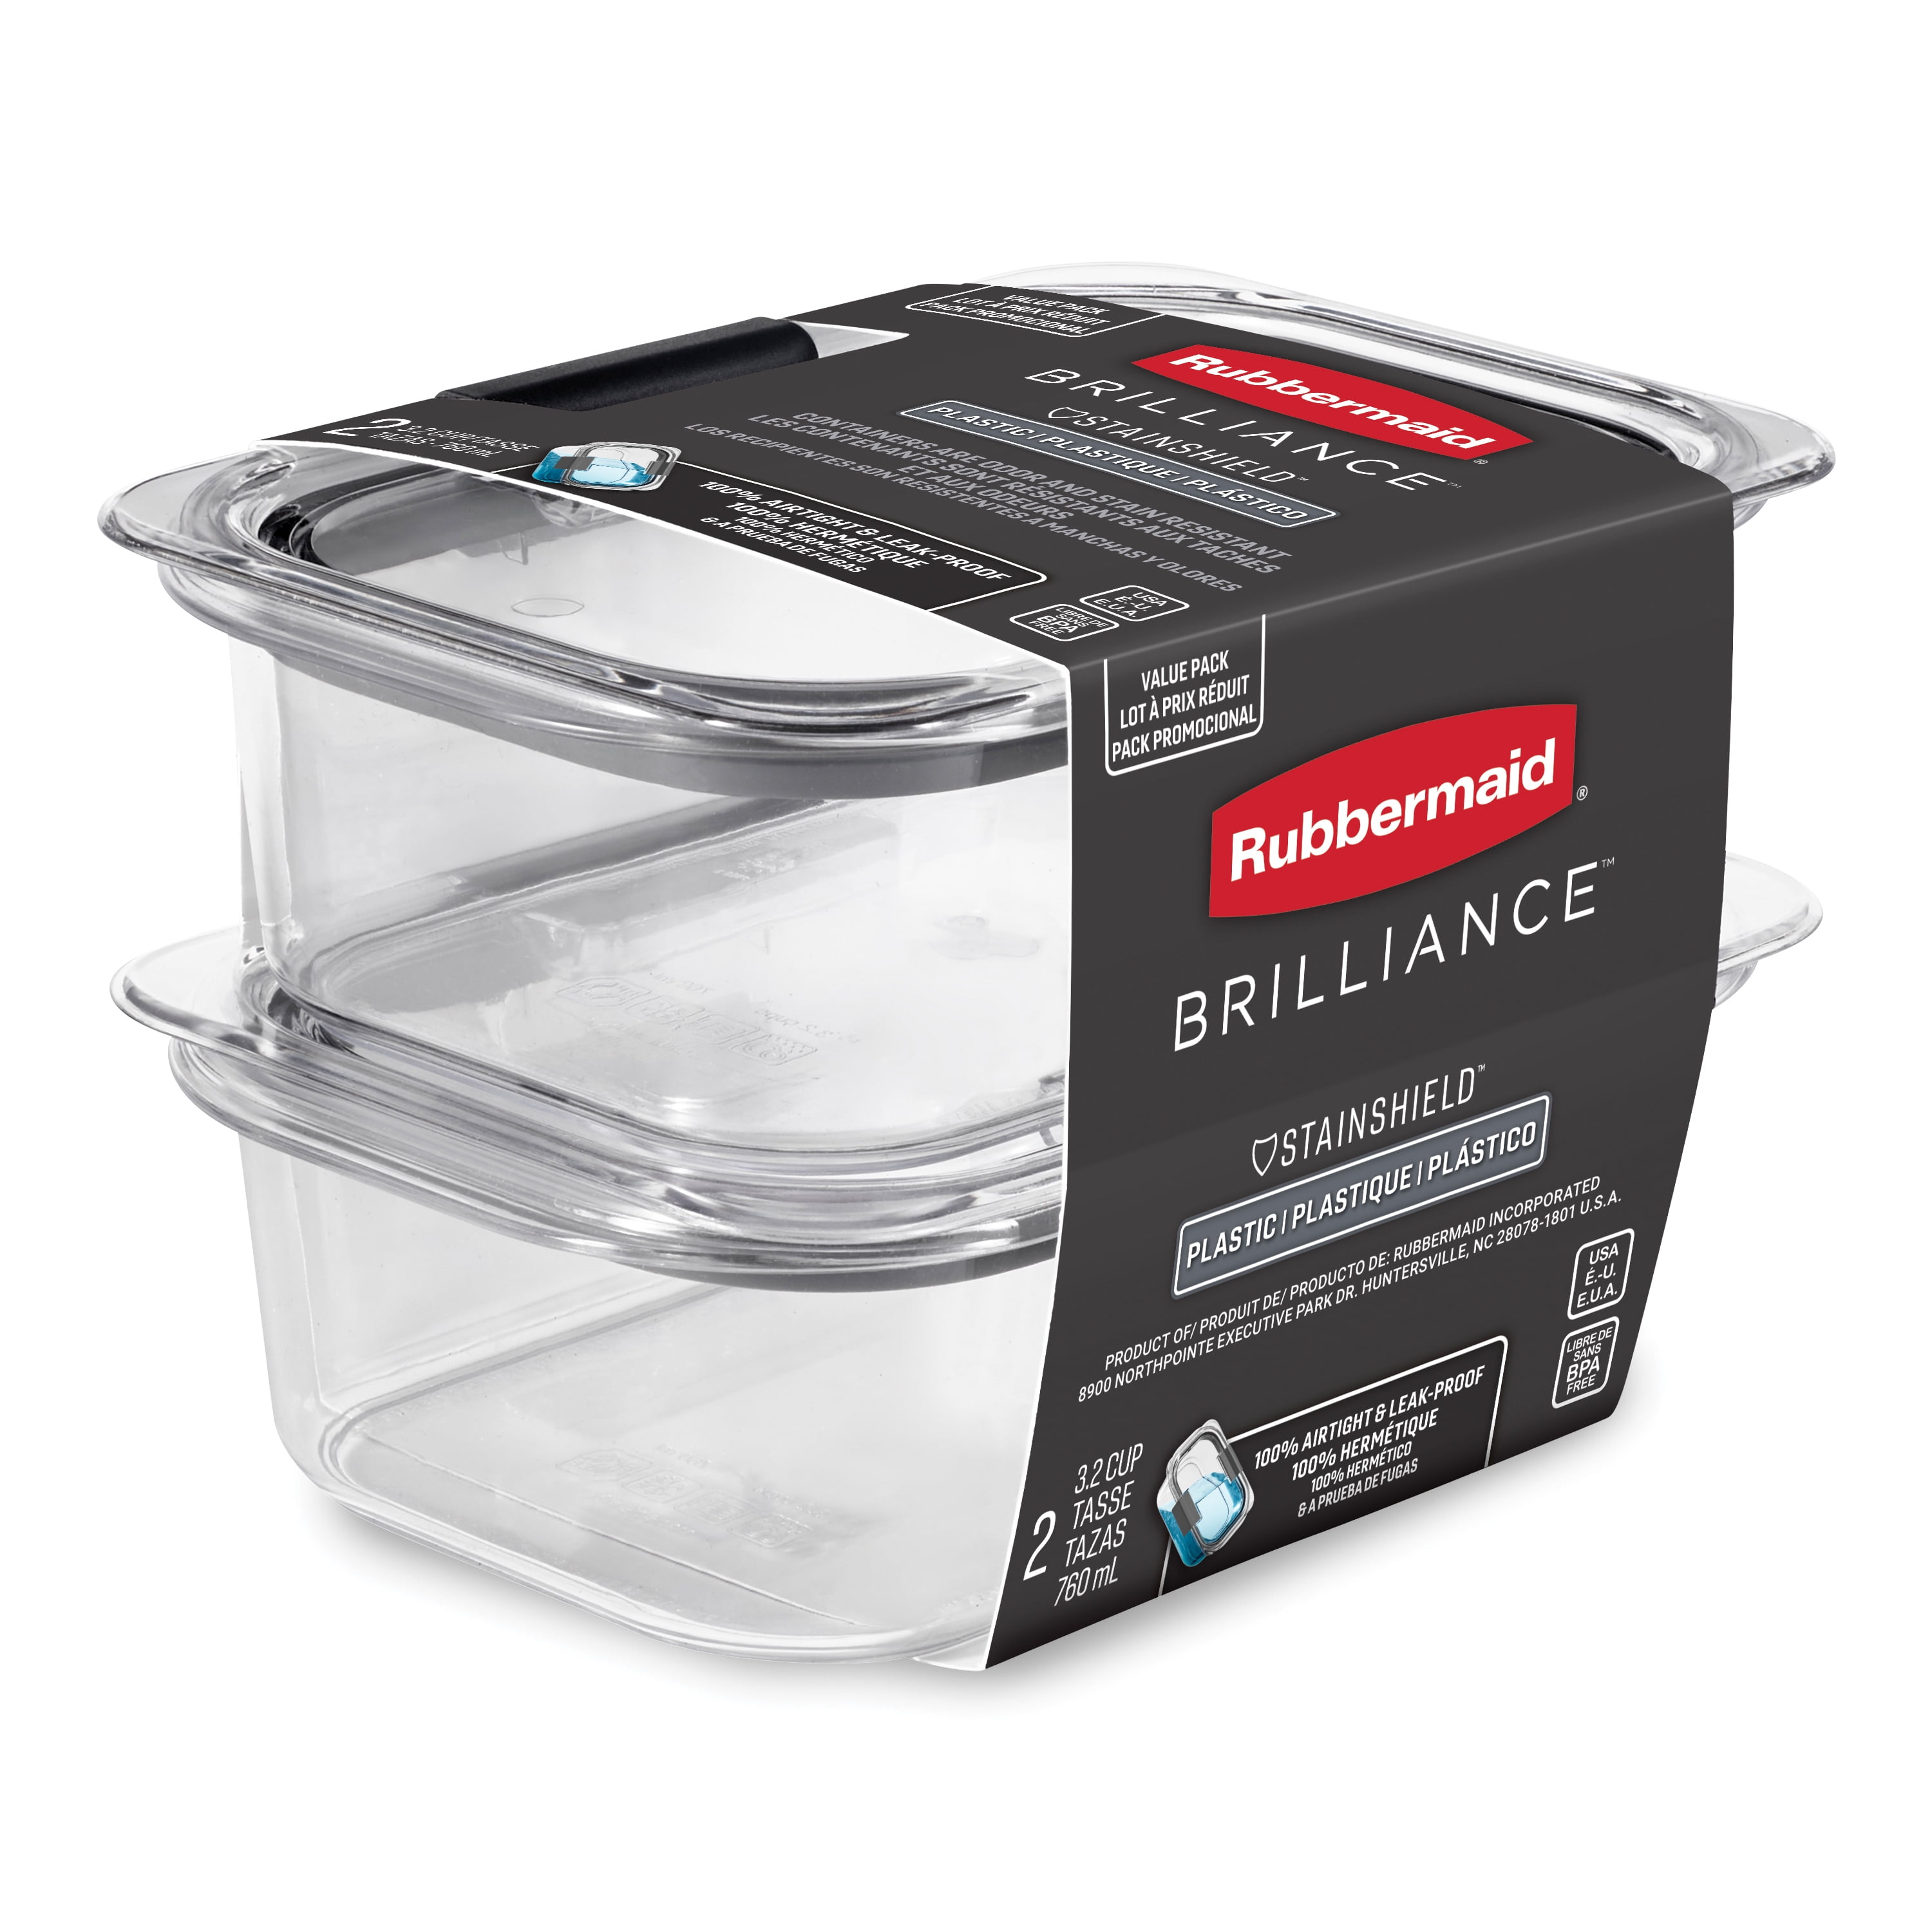 Rubbermaid 3.2 Cup Brilliance Glass Food Storage Containers, Set of 2 - NEW